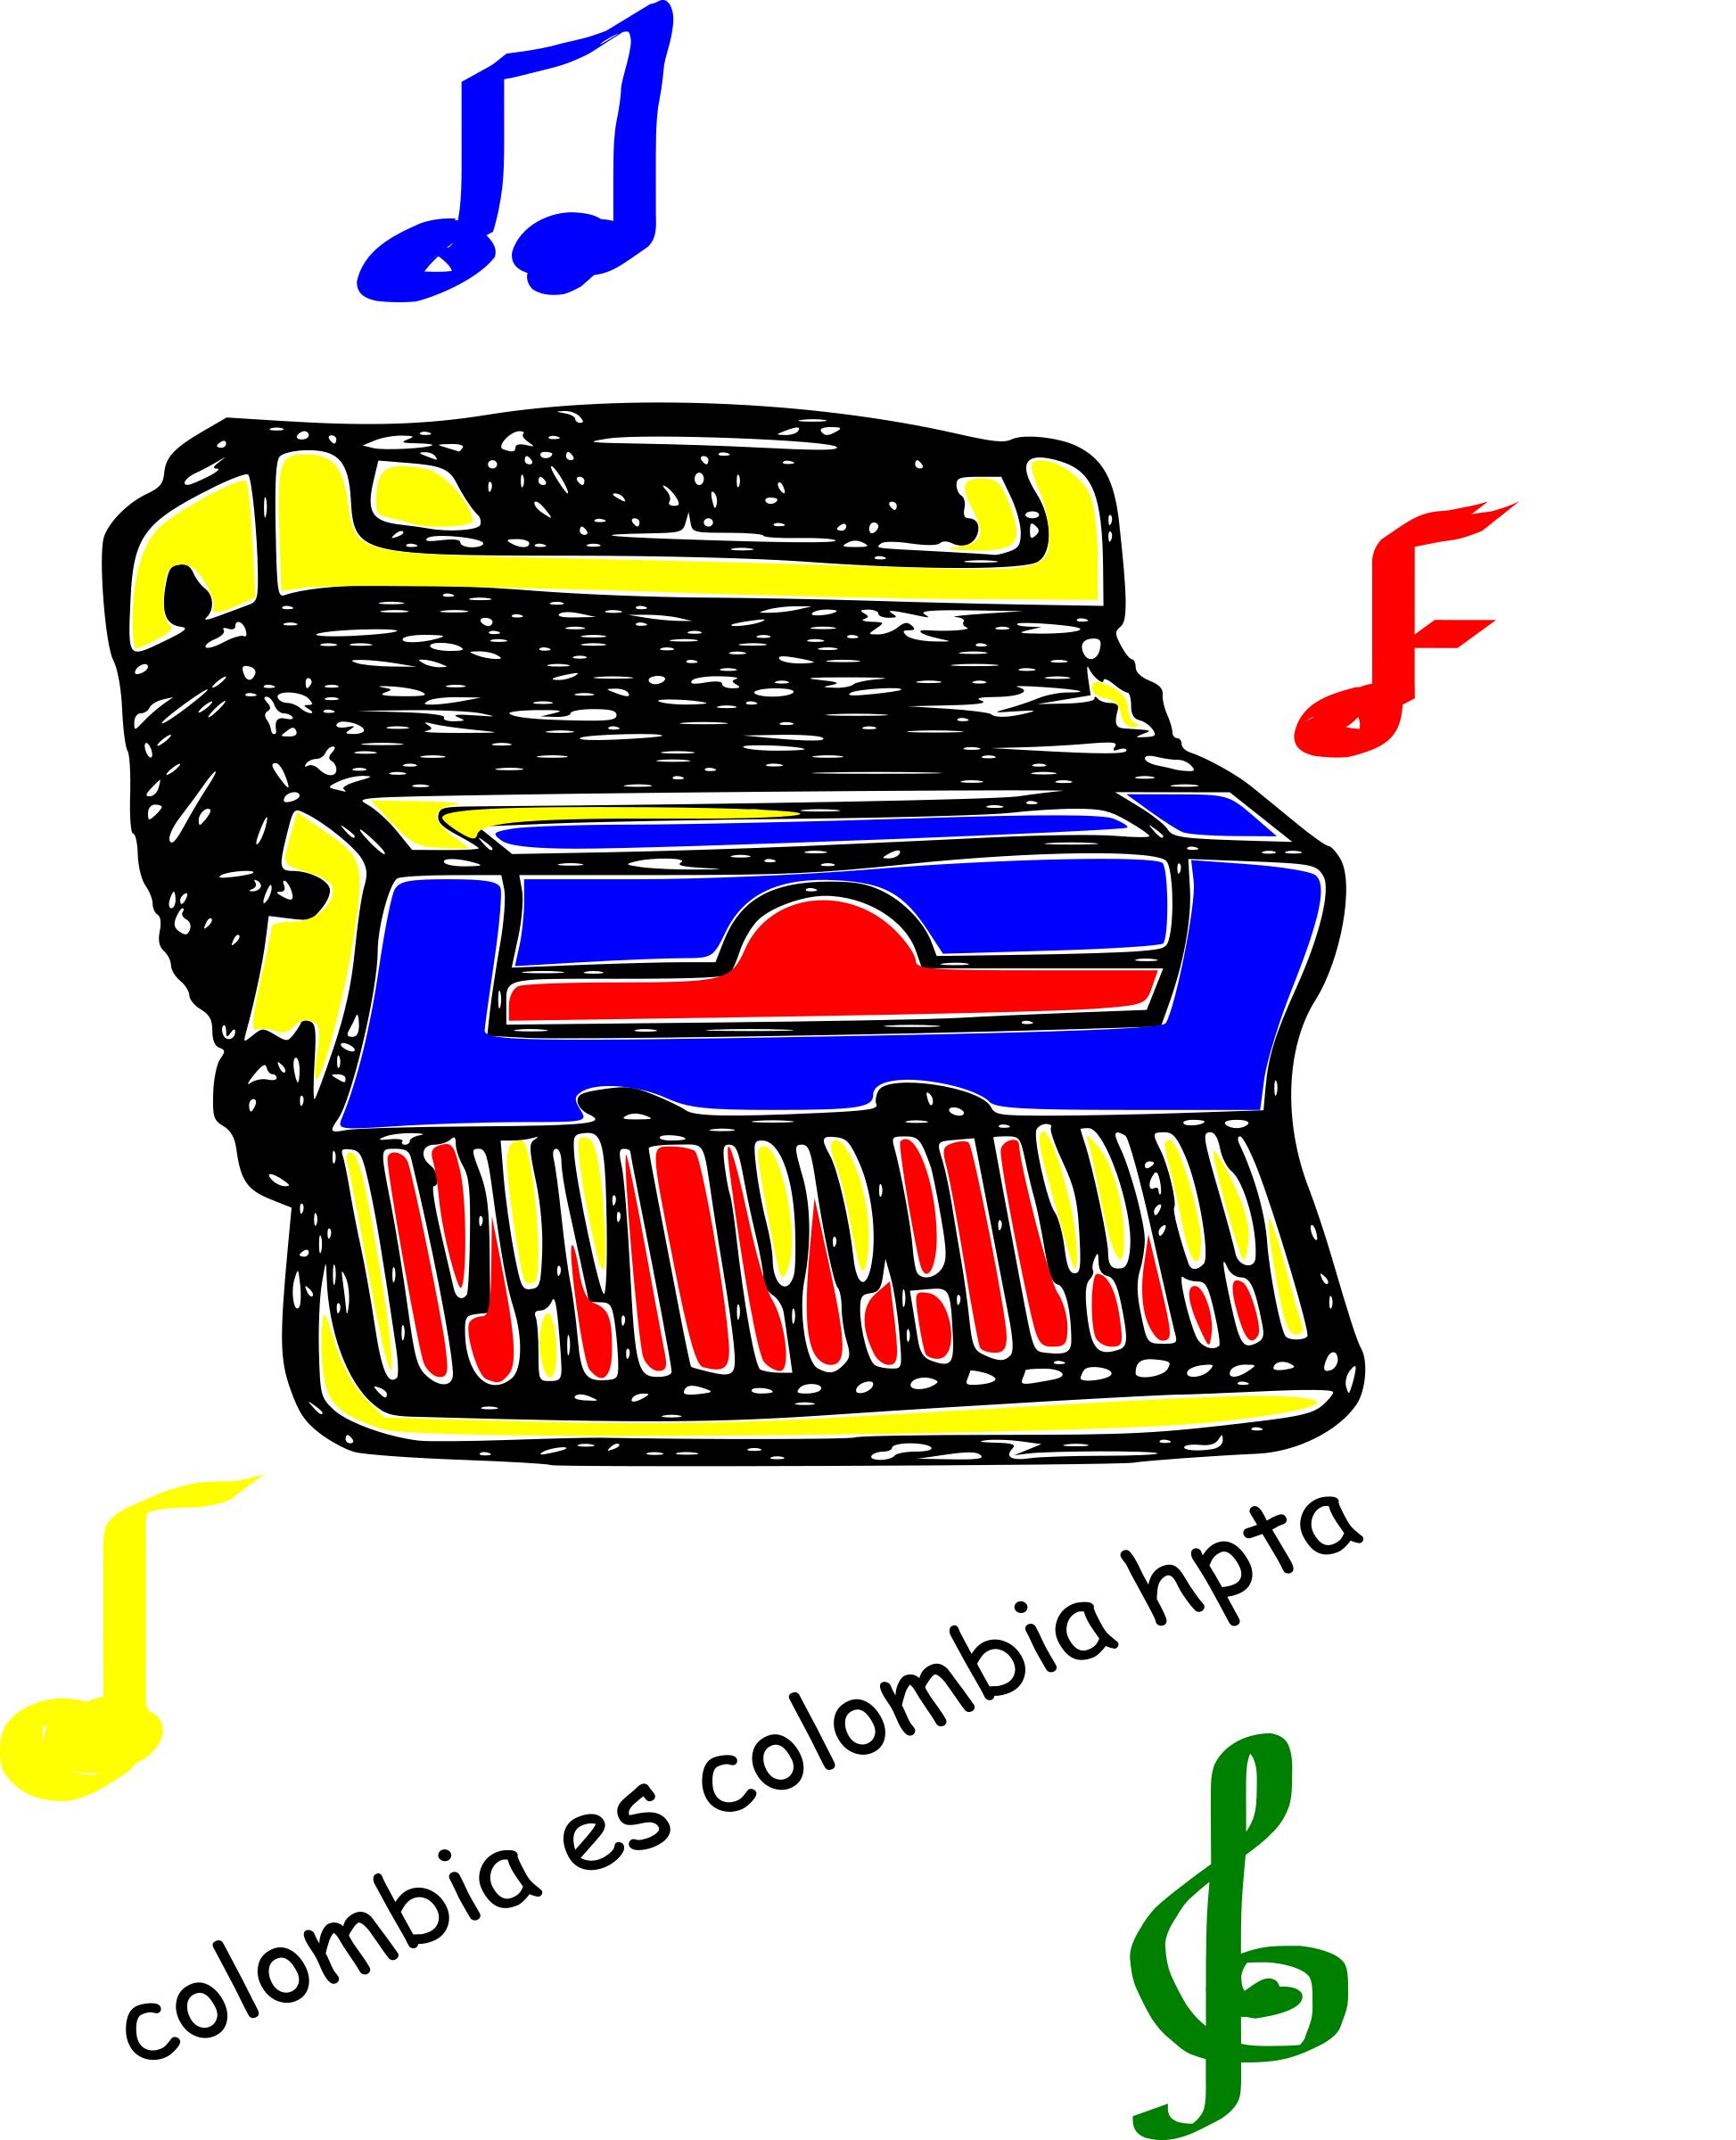 acordion colombiano png